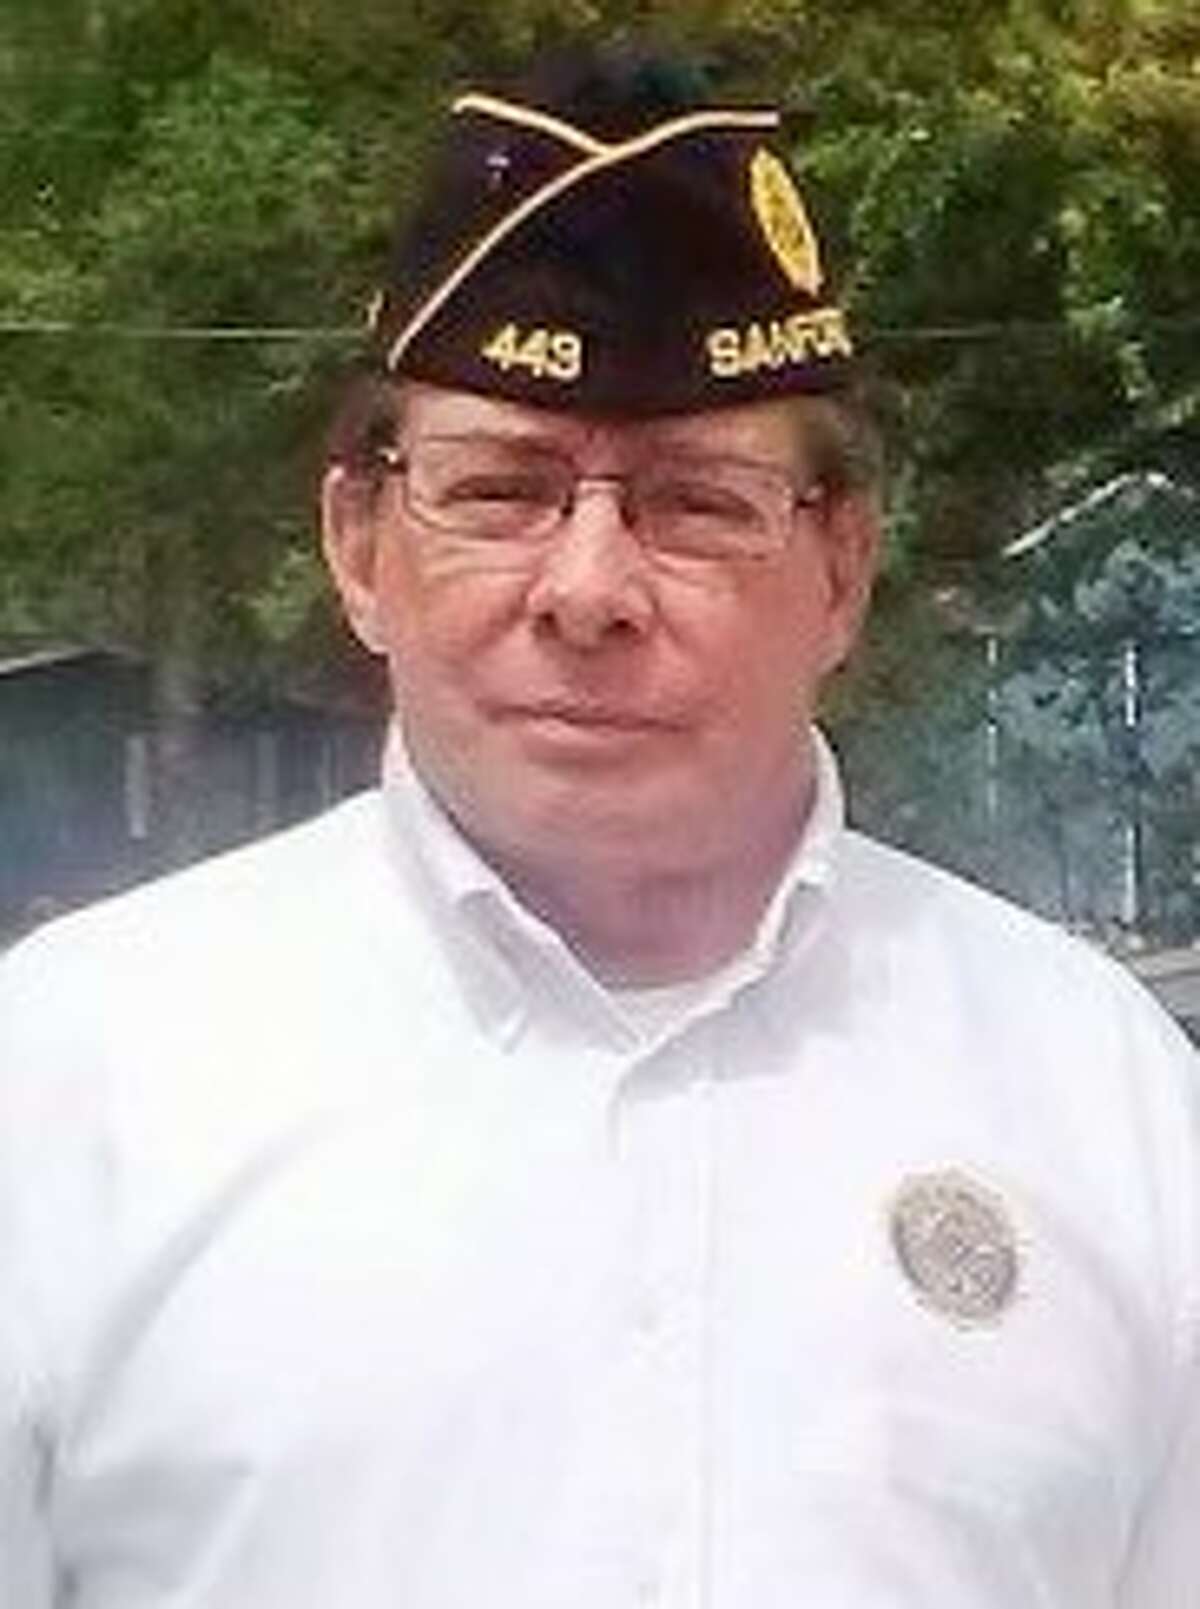 Mark Authier served as commander of the Sanford American Legion Post 443 for seven years.